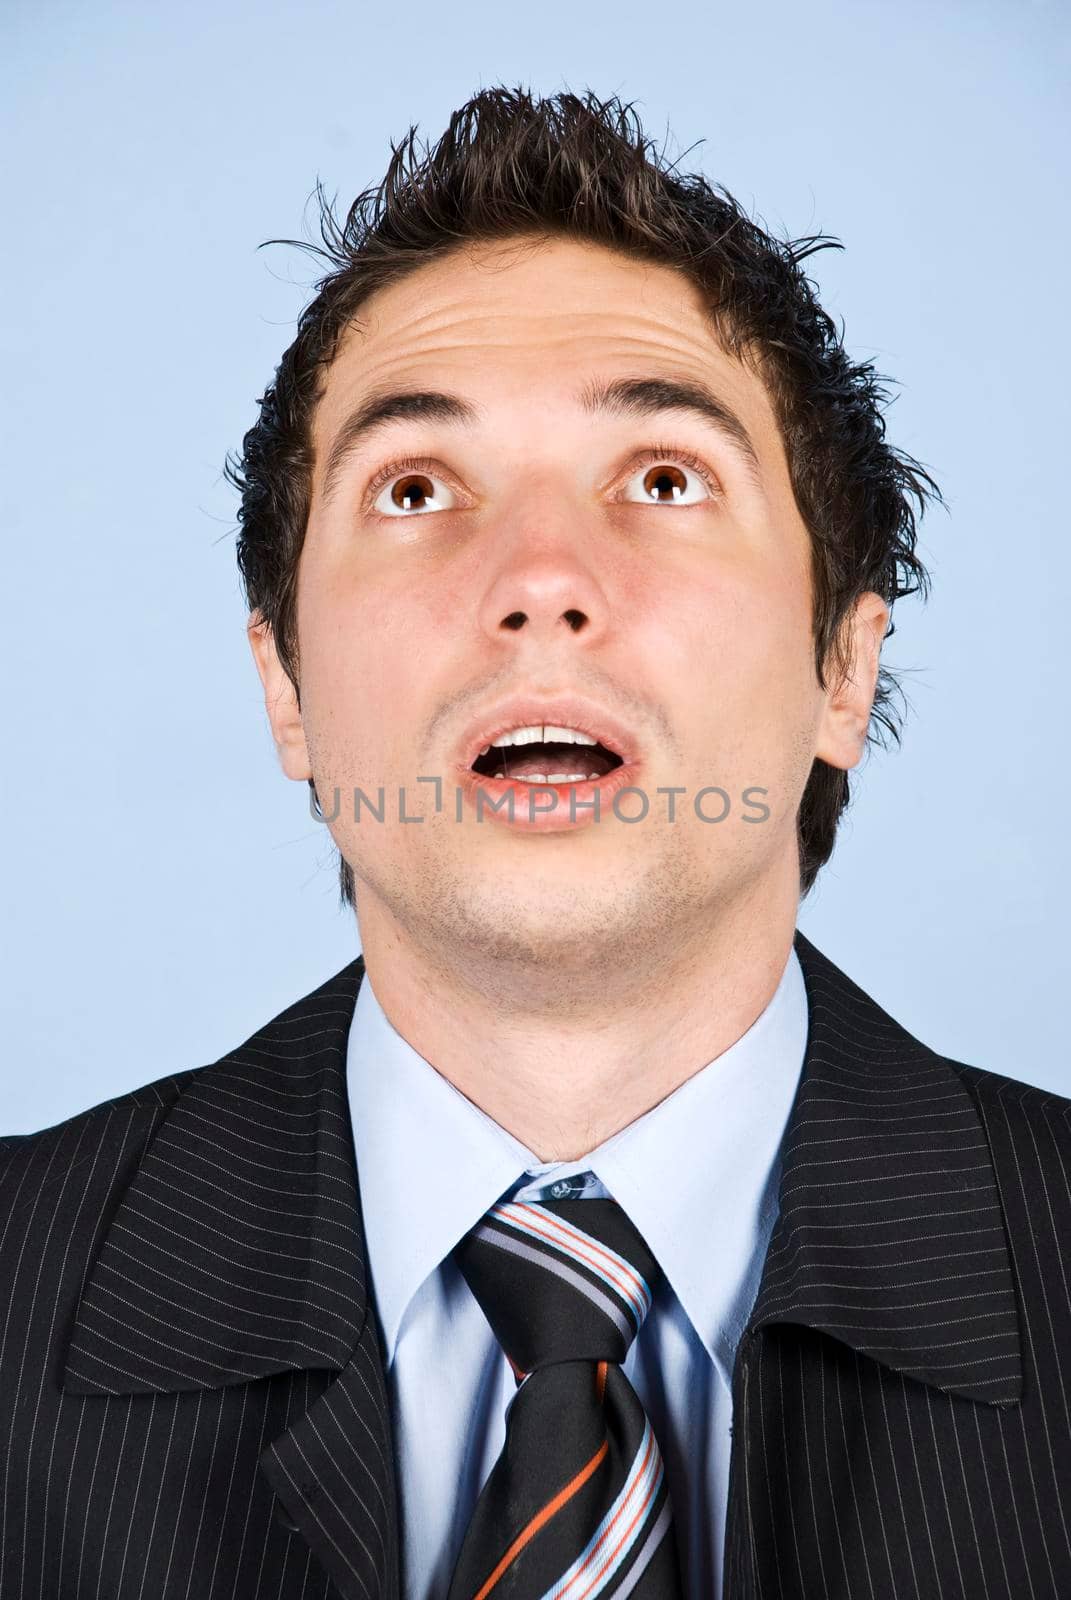 Portrait of amazed businessman with cool hairstyle looking up with mouth open and making big eyes